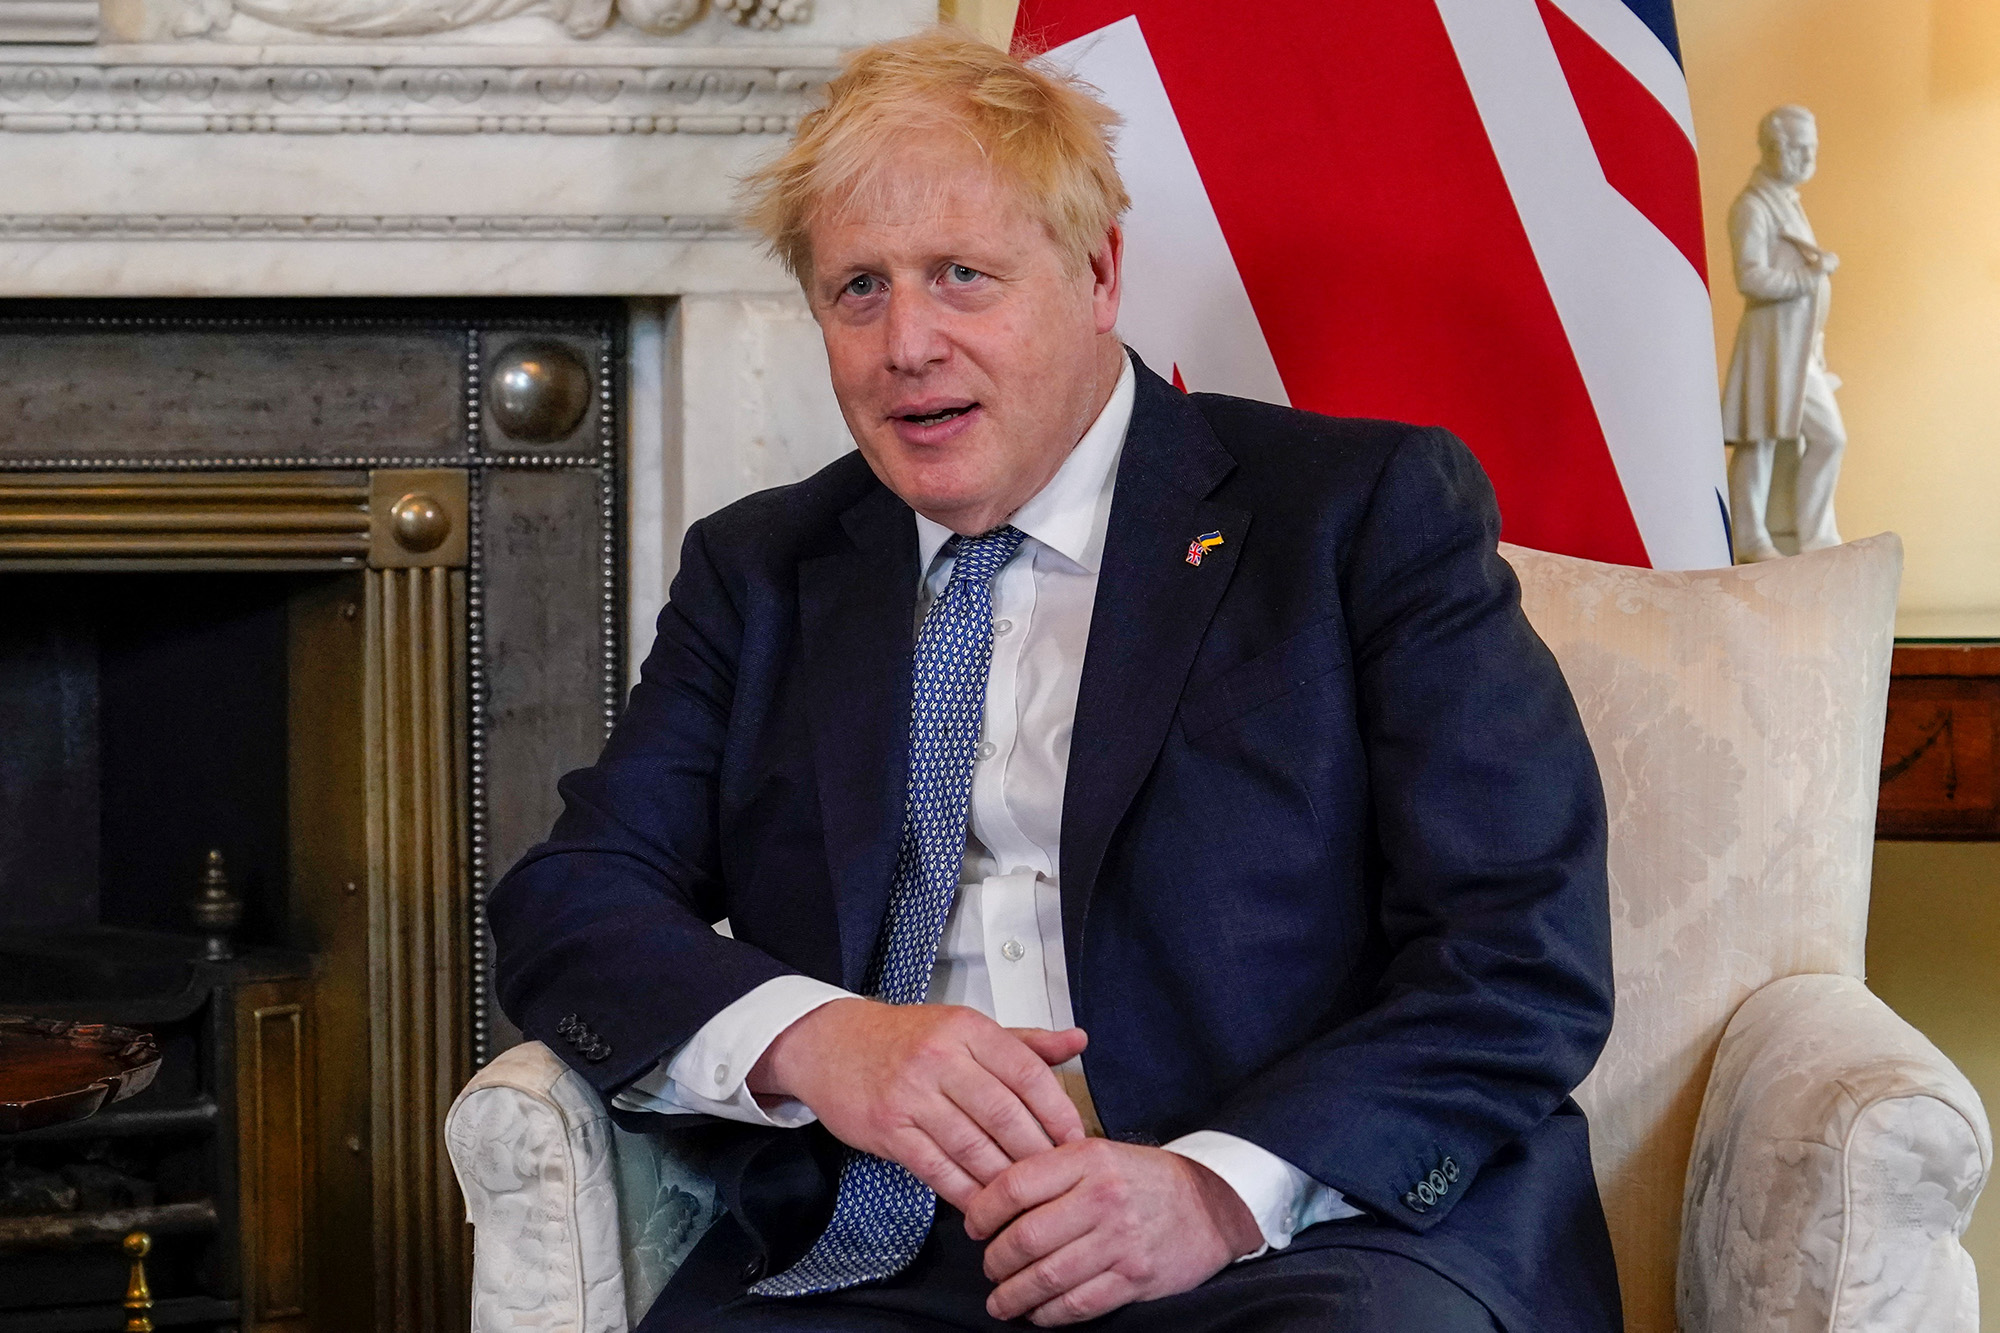 Britain's Prime Minister Boris Johnson pictured inside 10 Downing Street in London, England, on June 6.